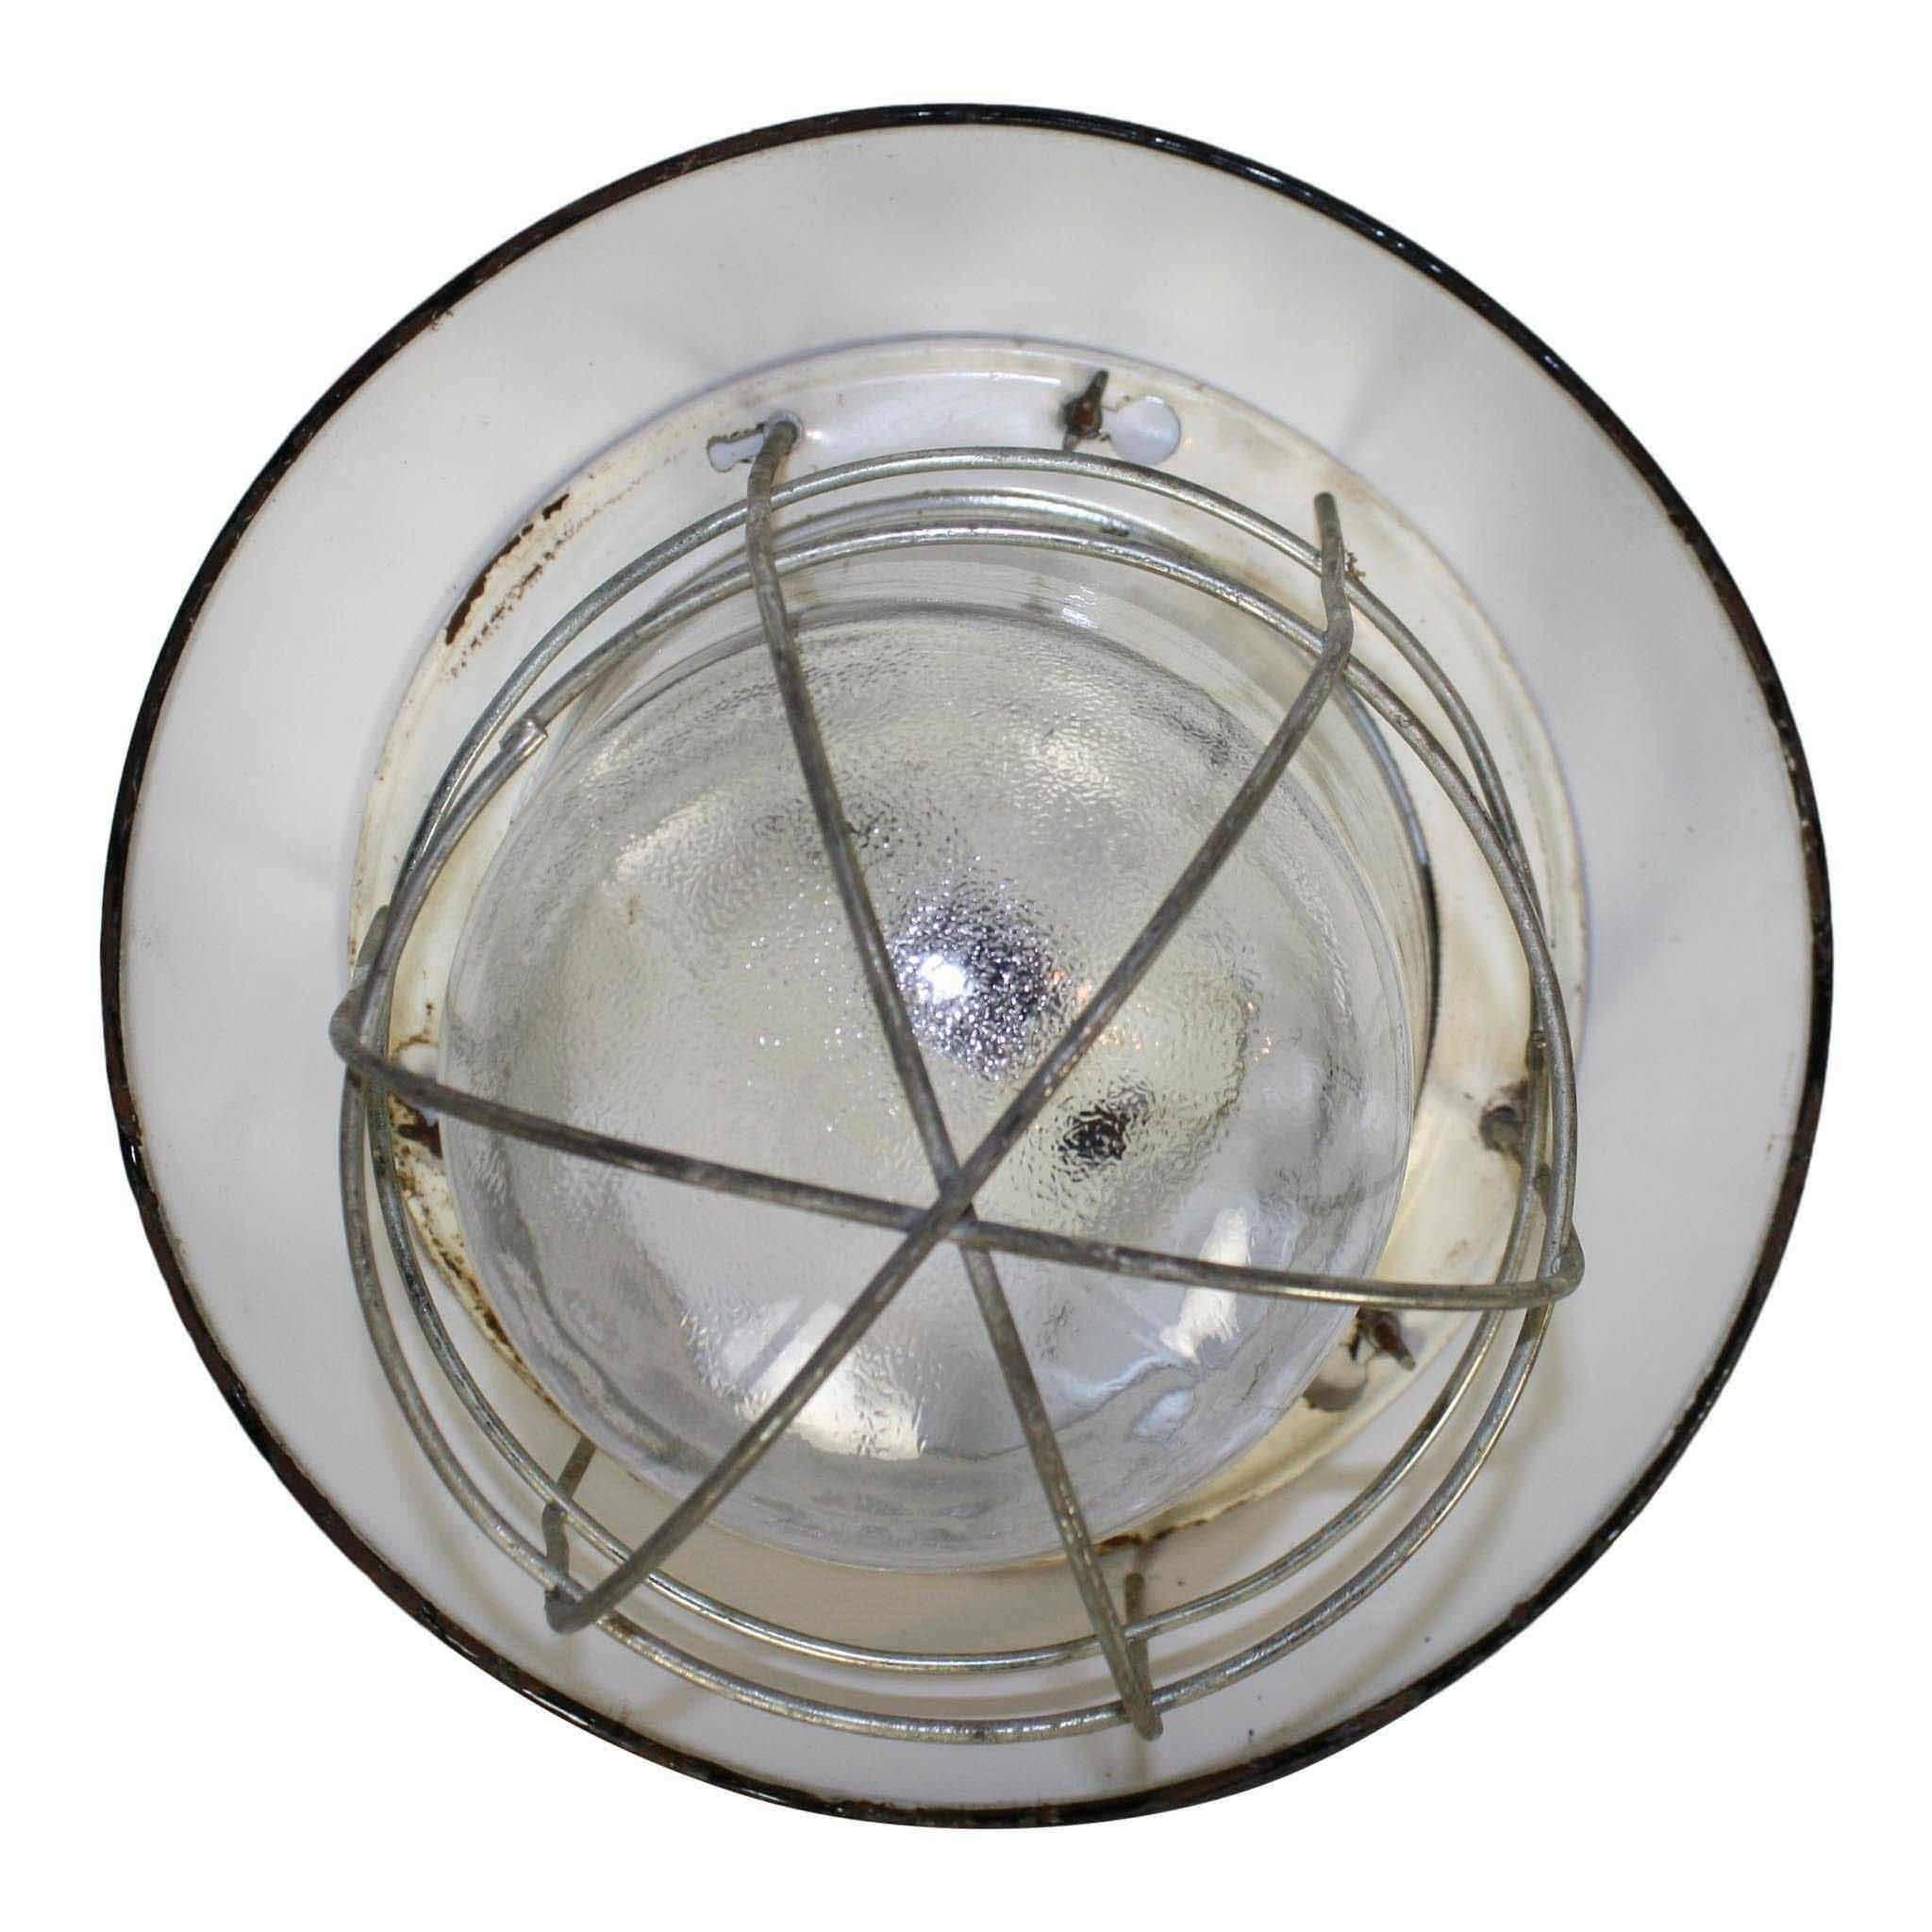 This industrial ceiling light has a black shade and glass globe with a cage. It is not wired but can be easily wired for use. 